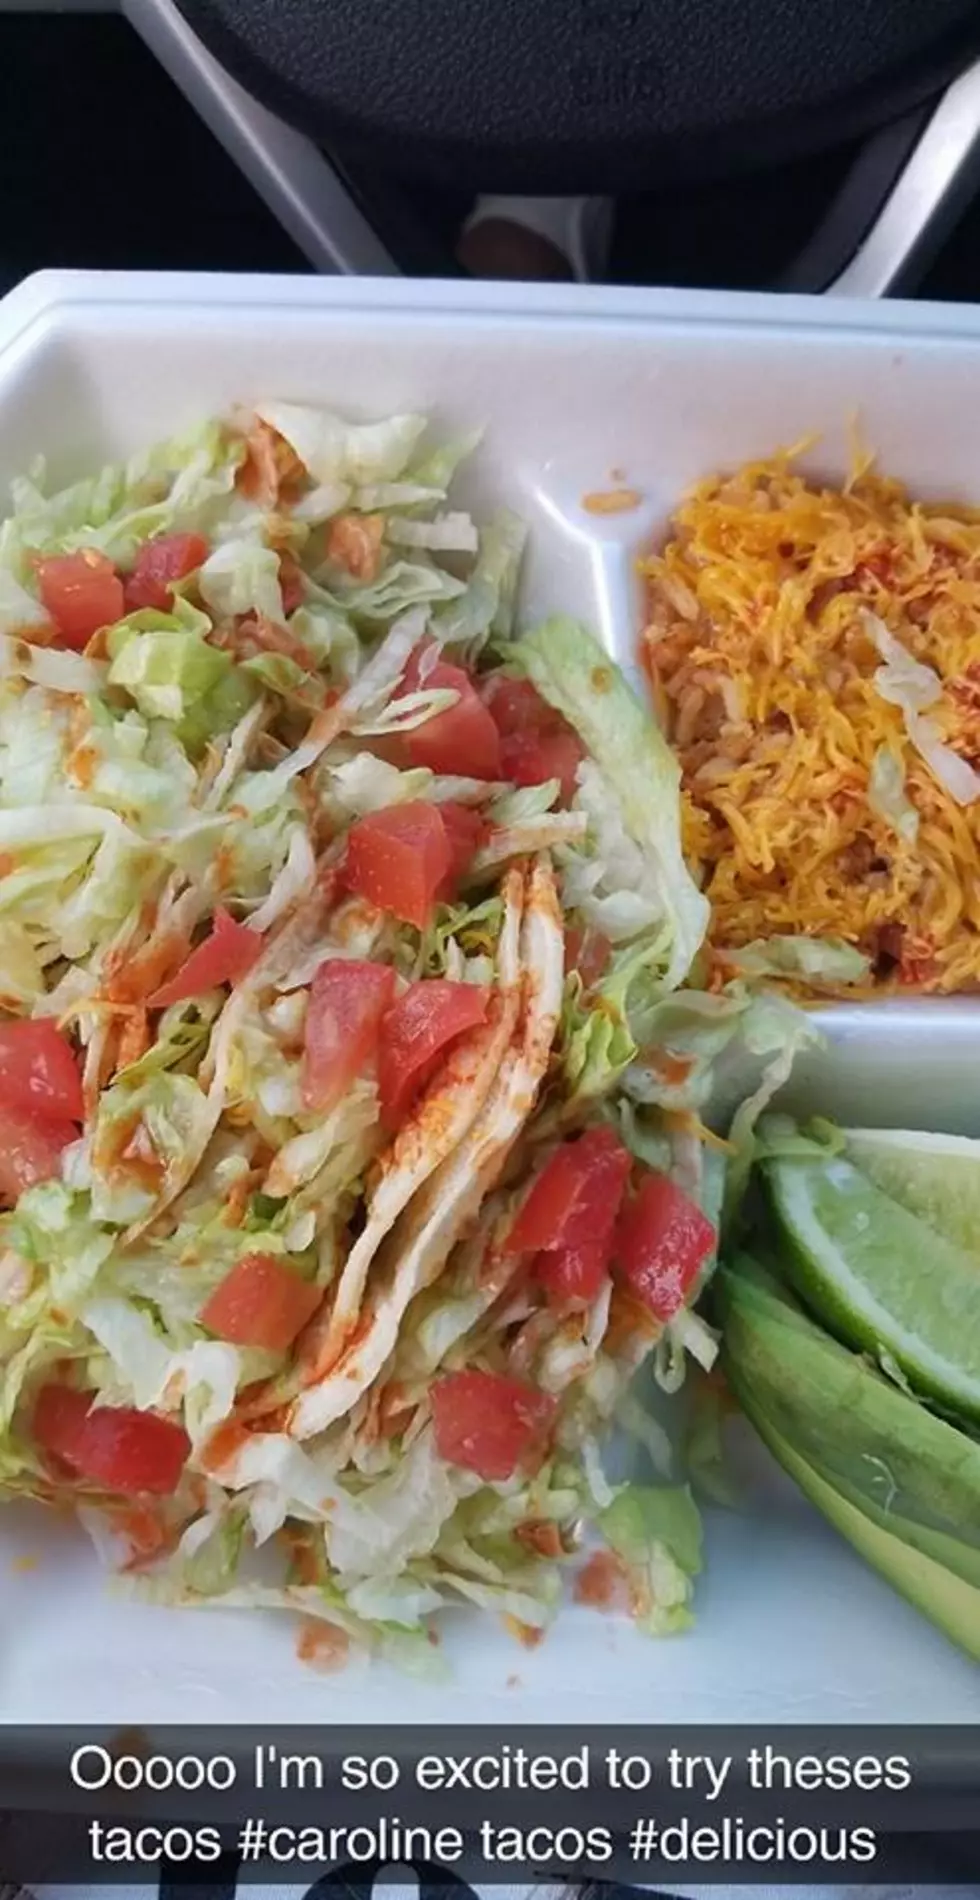 A New Lubbock Restaurant Will Have You Saying ‘Let’s Taco About It’